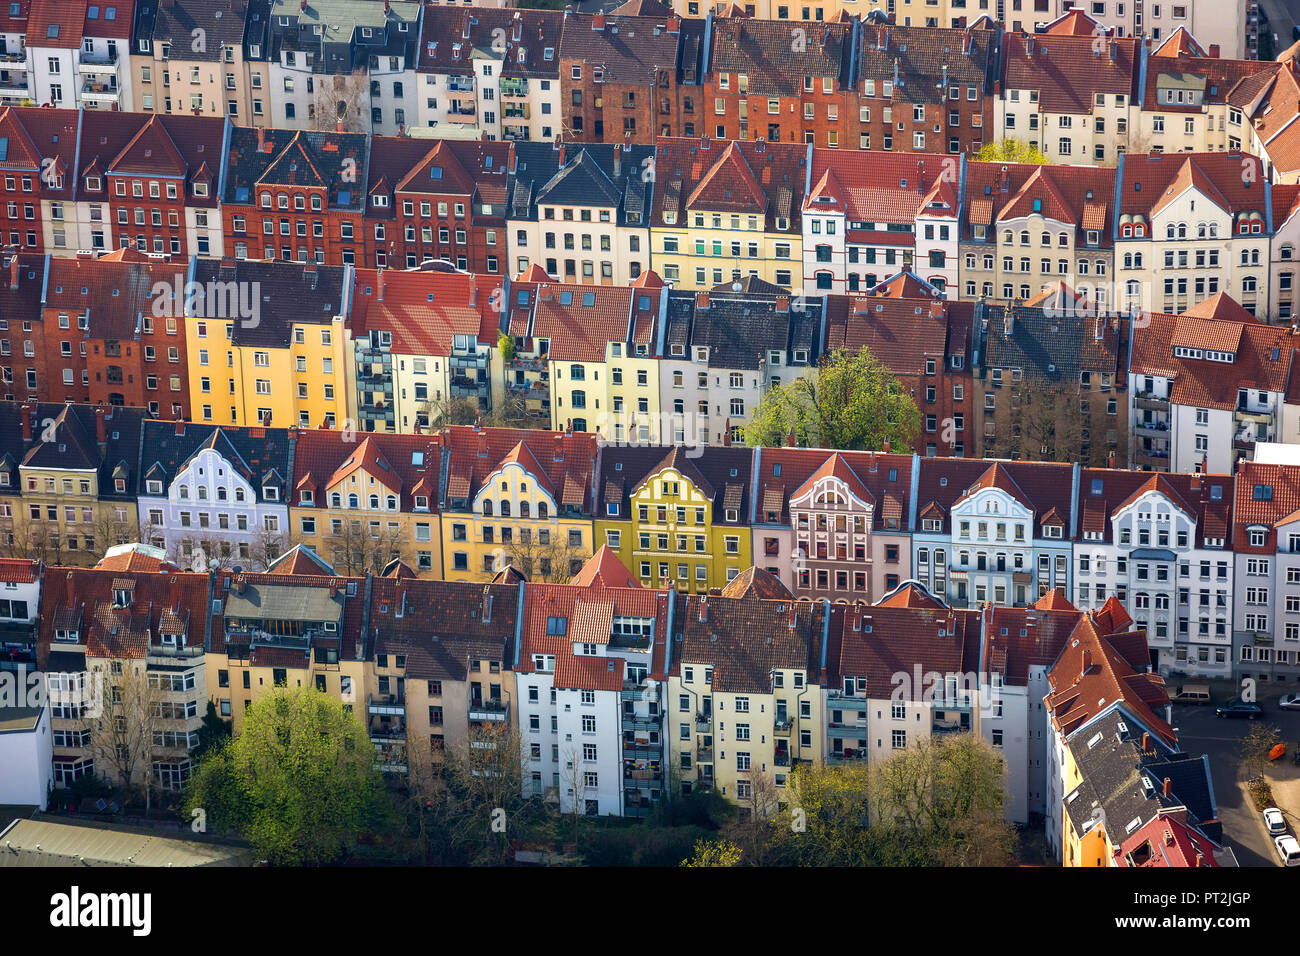 District Linden-Nord, perimeter development, rivers Leine and Ihme, red tile roofs, St.Benno Church, Hannover, state capital, Lower Saxony, Germany Stock Photo